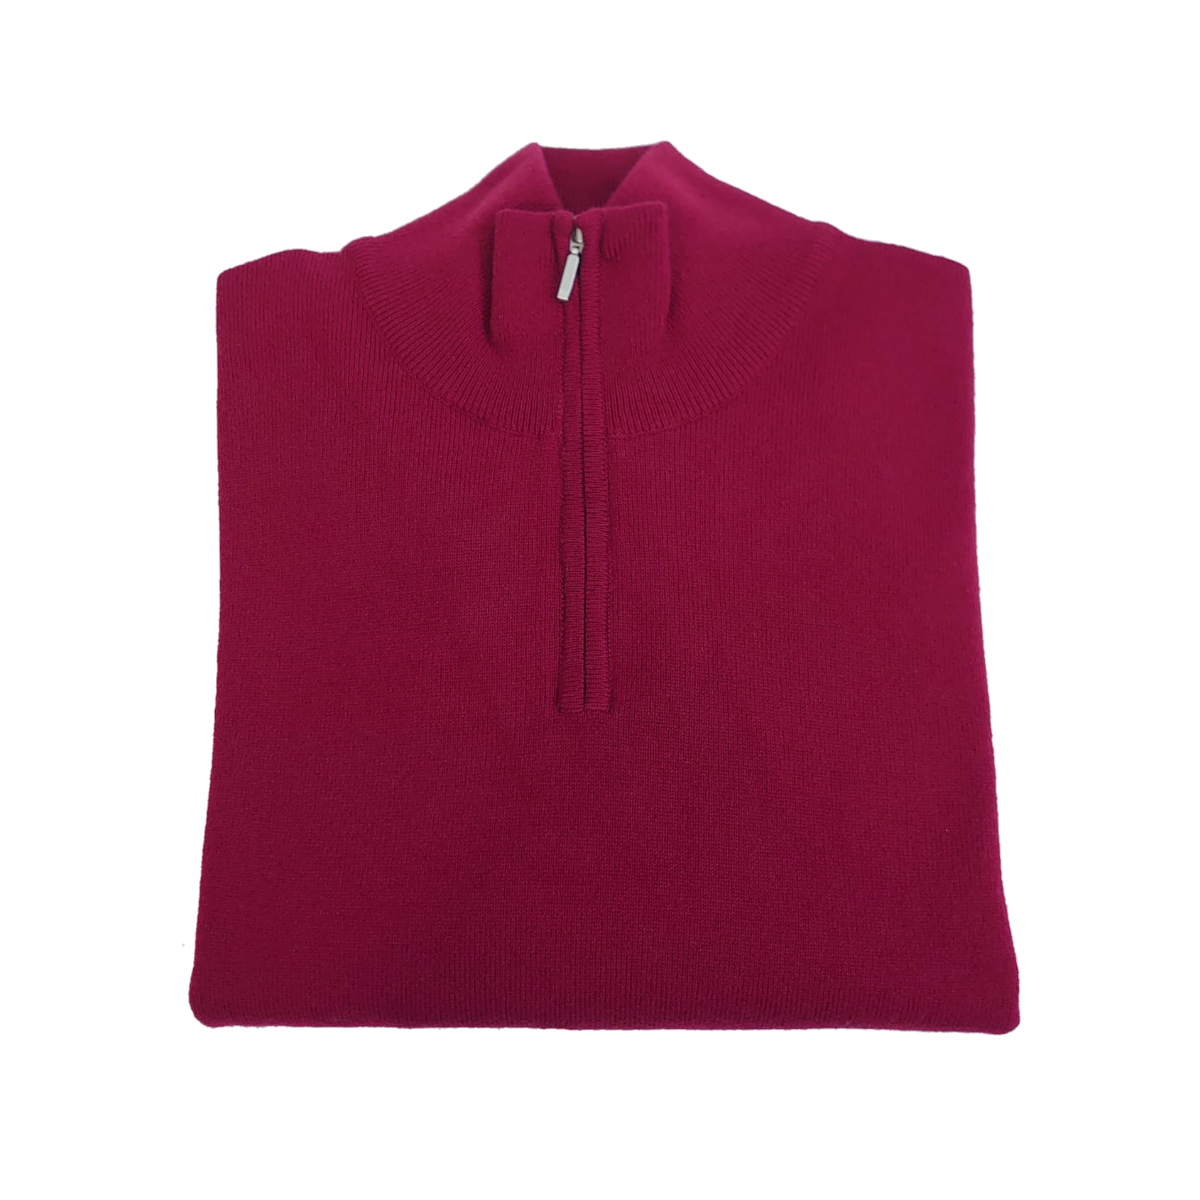 Men's Relaxed Fit Zip Neck 100% Pure Cashmere Jumper - Wine Red - XXL